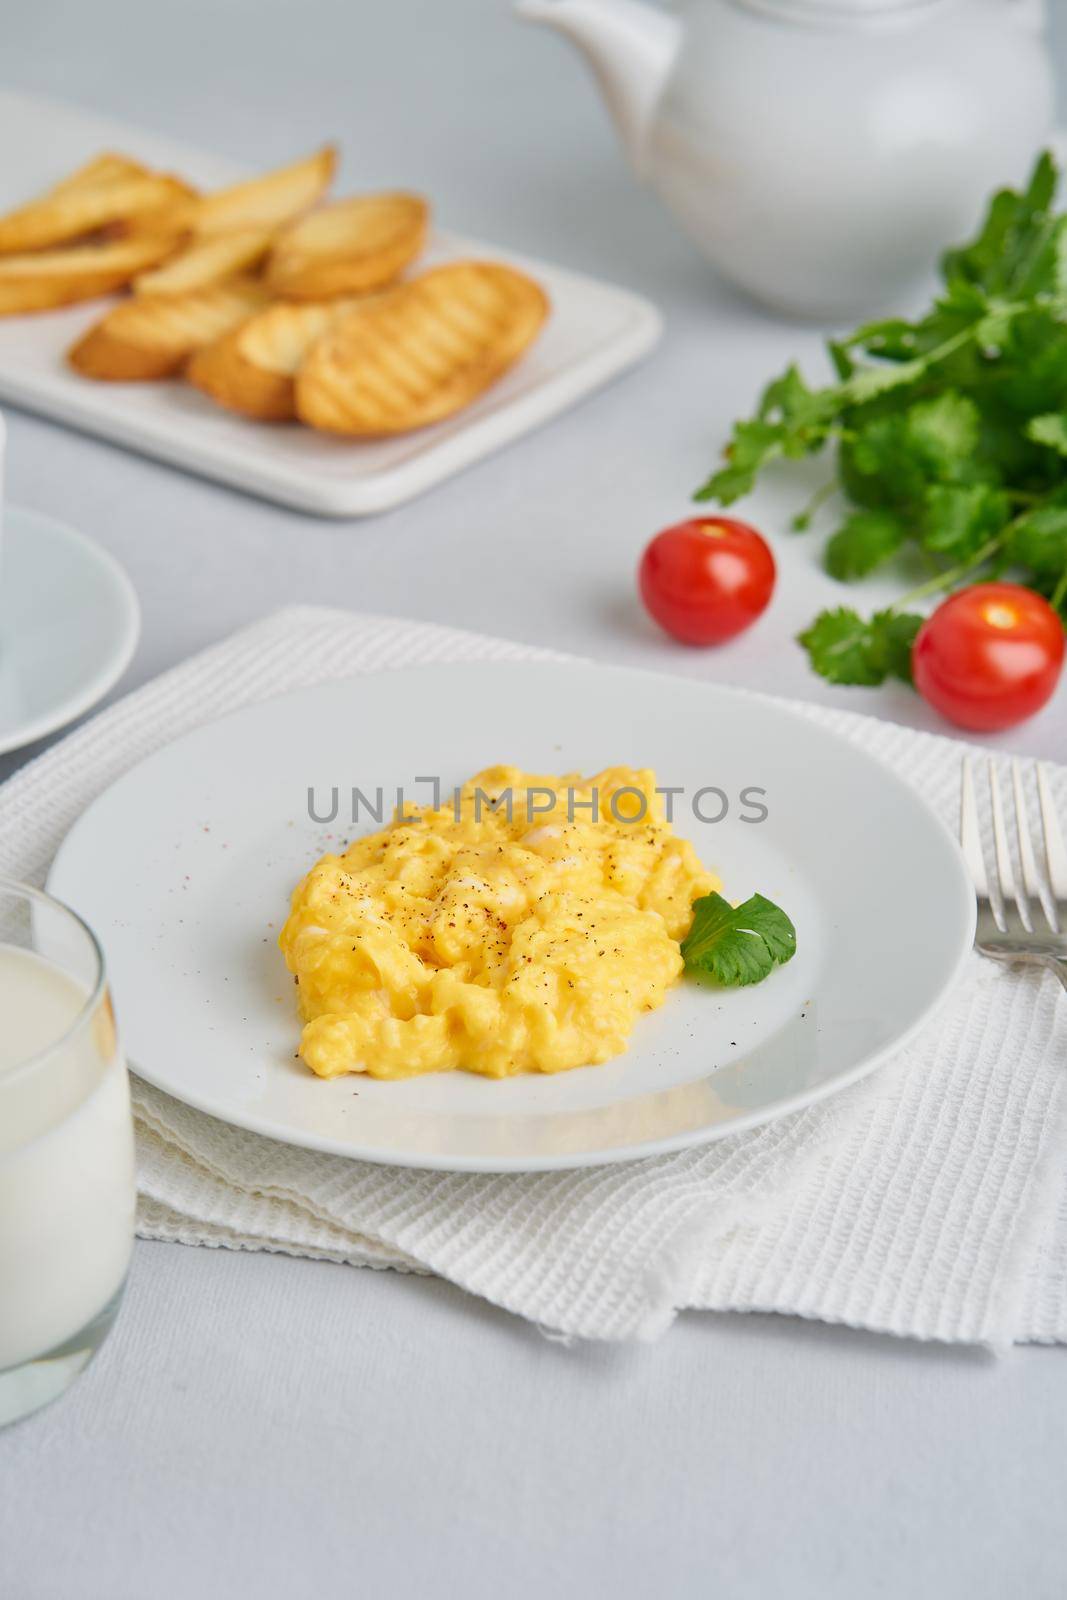 Scrambled eggs, Omelette. Breakfast with pan-fried eggs, glass of milk, tomatoes by NataBene